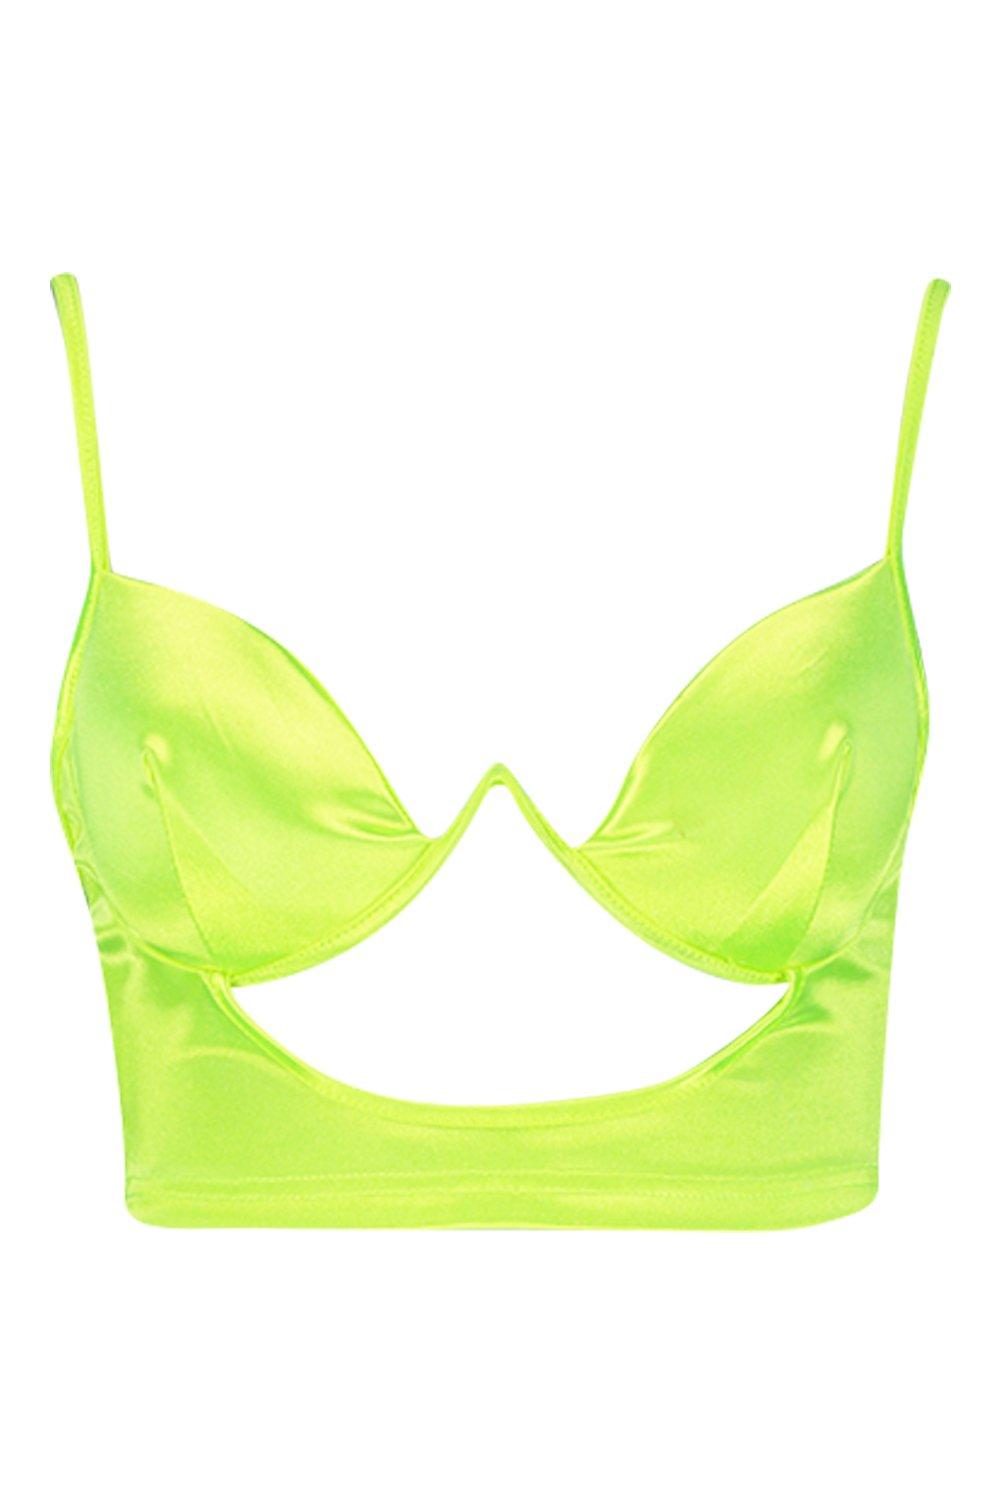 https://media.boohoo.com/i/boohoo/fzz97572_neon-lime_xl_2/female-satin-underwired-cut-out-bralette